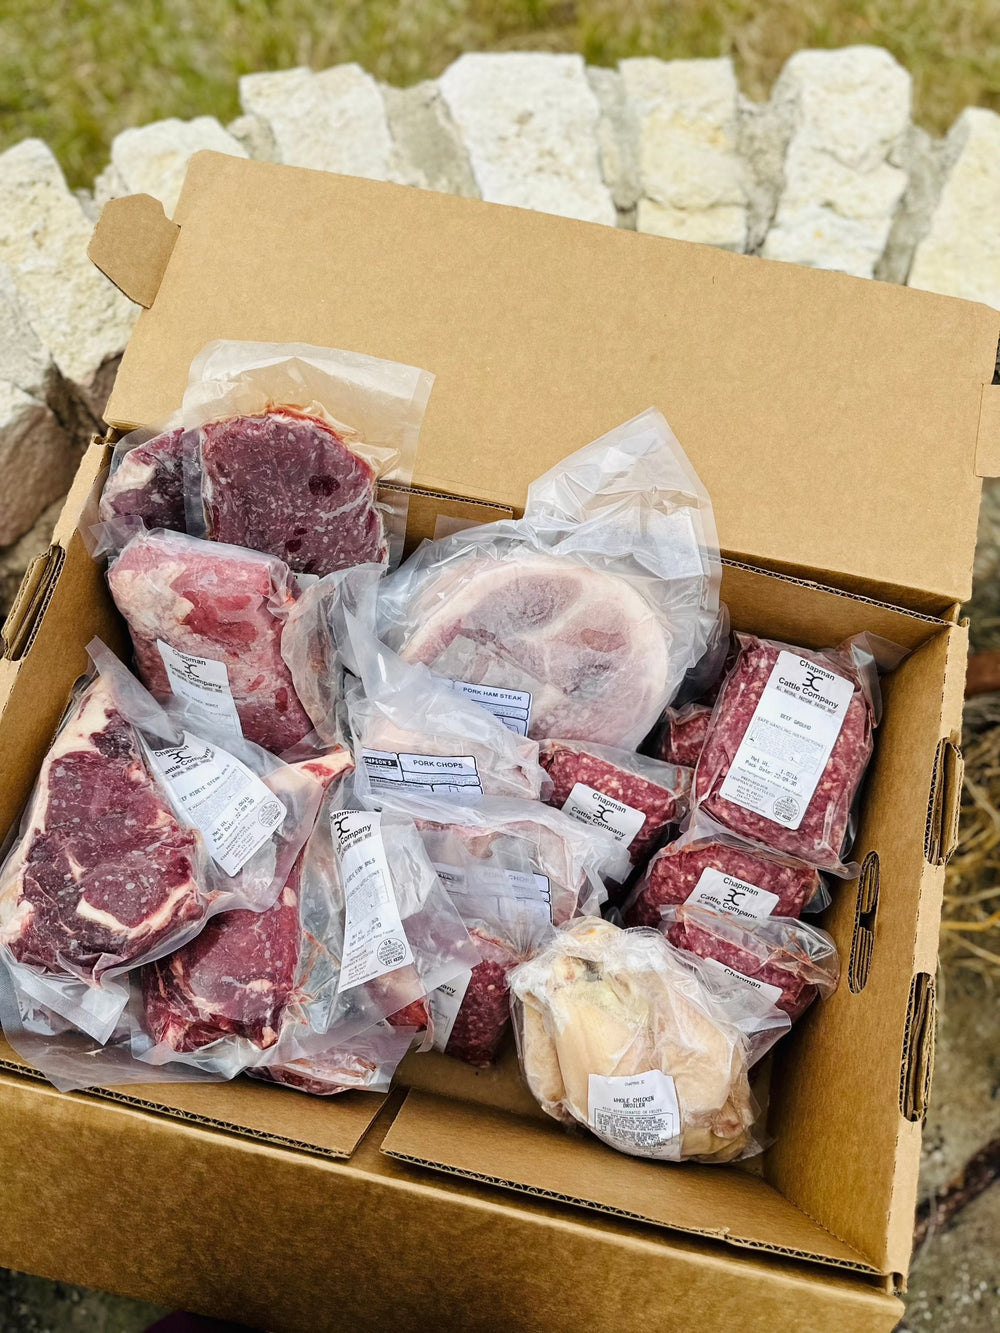 Chapman 3C Cattle Company Beef Box Farm To Table Meat Box| Beef | Pork| Chicken